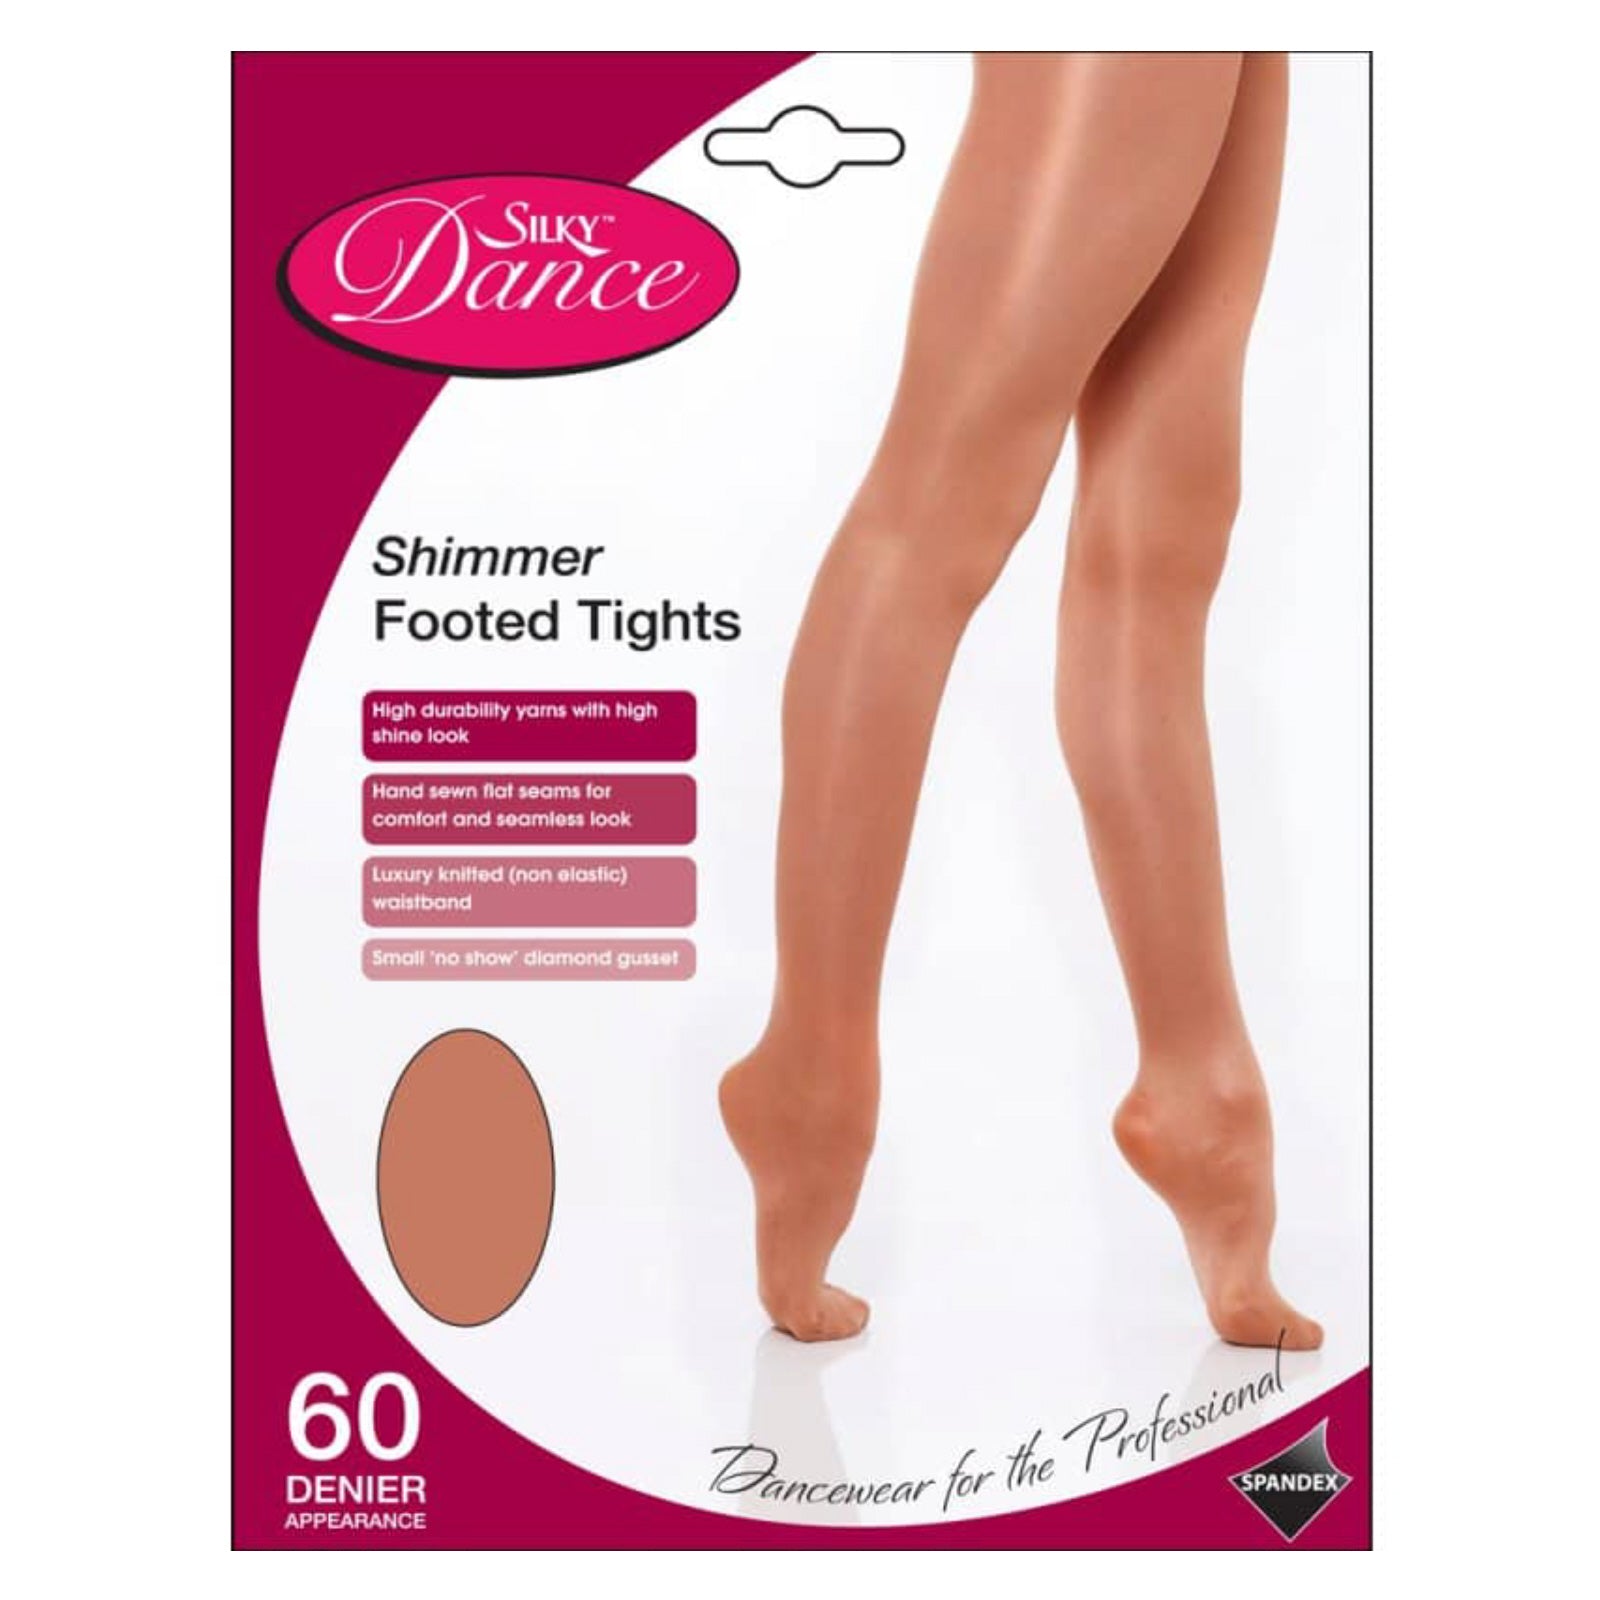 Ladies Shimmer Footed Tights